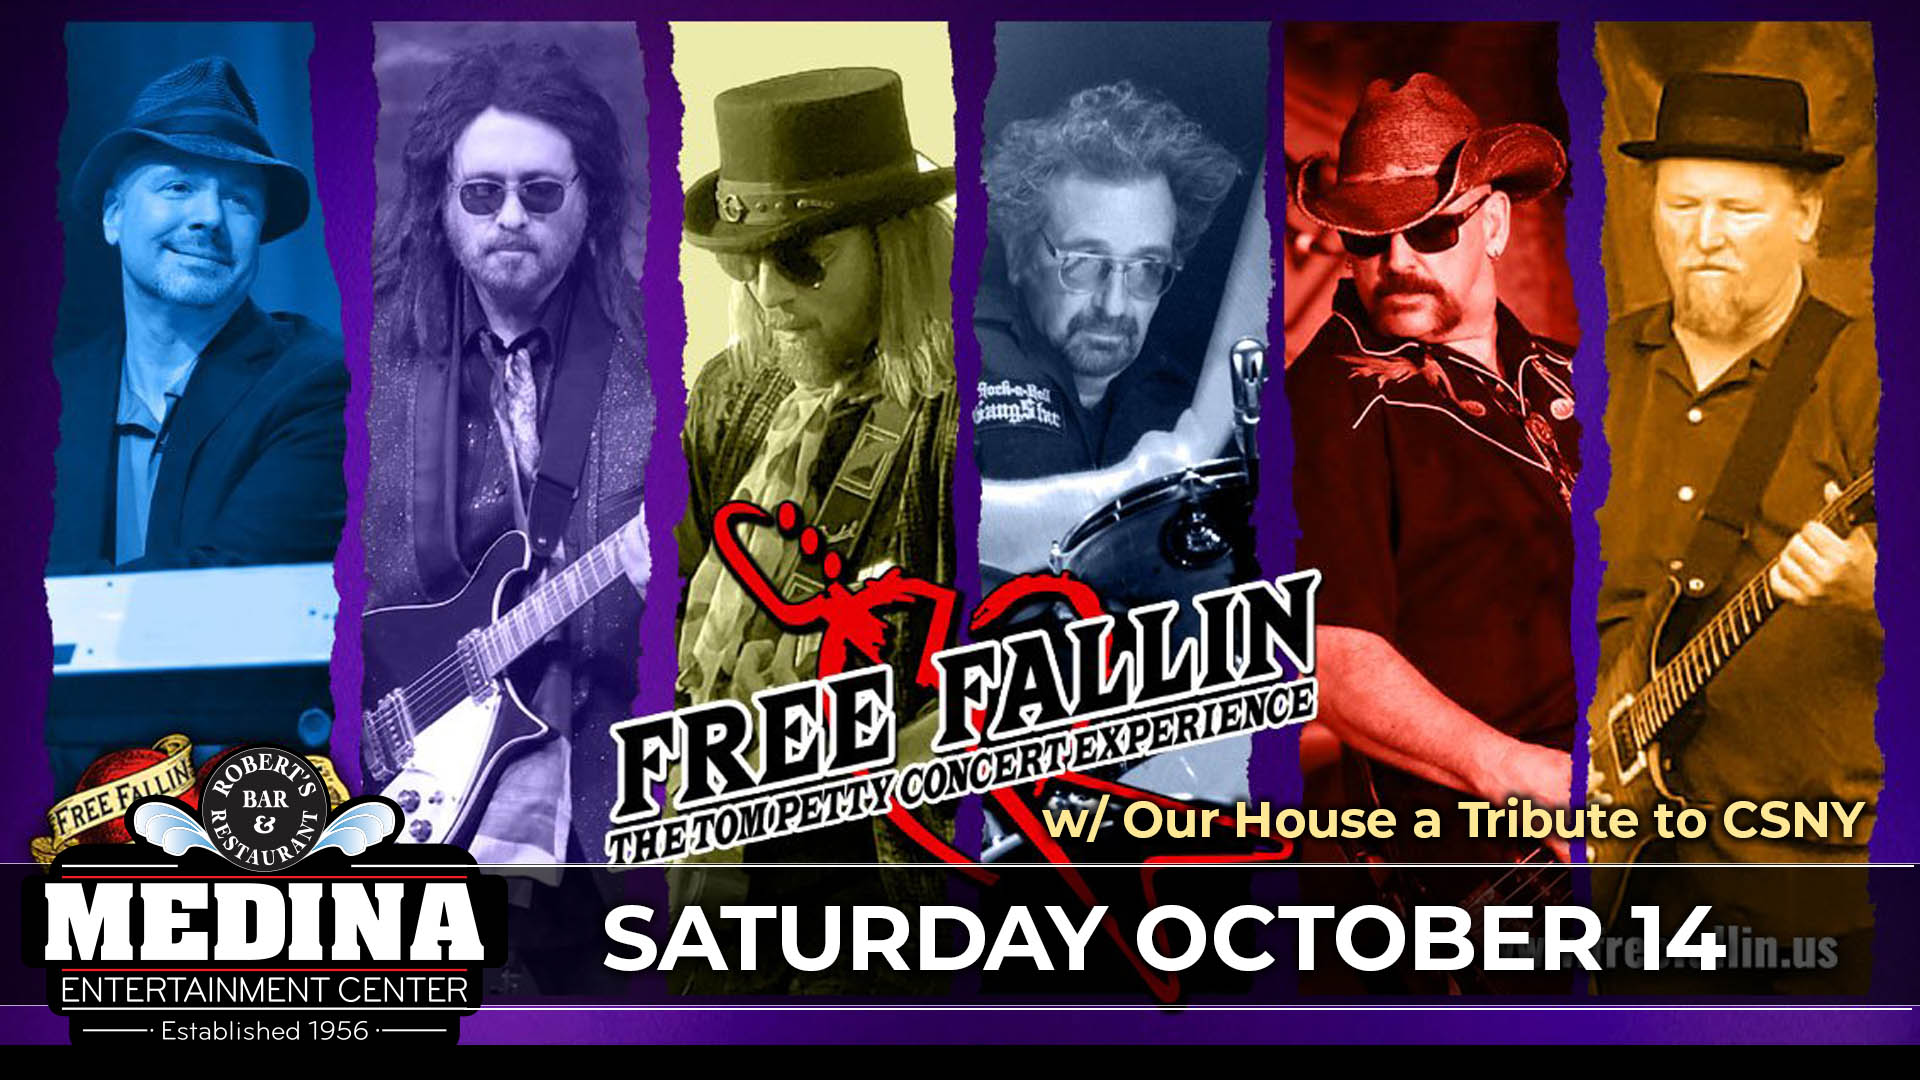 Free Fallin’ The Tom Petty Concert Experience with guest OUR HOUSE a Tribute to Crosby, Stills, Nash, & Young Medina Entertainment Center Saturday, October 14, 2023 Doors: 7:00PM | Music: 8:00PM | 21+ Tickets on-sale Friday, July 28 at 11AM General Seating $23/ Silver Reserved $28 / Gold Reserved $33 plus applicable fees